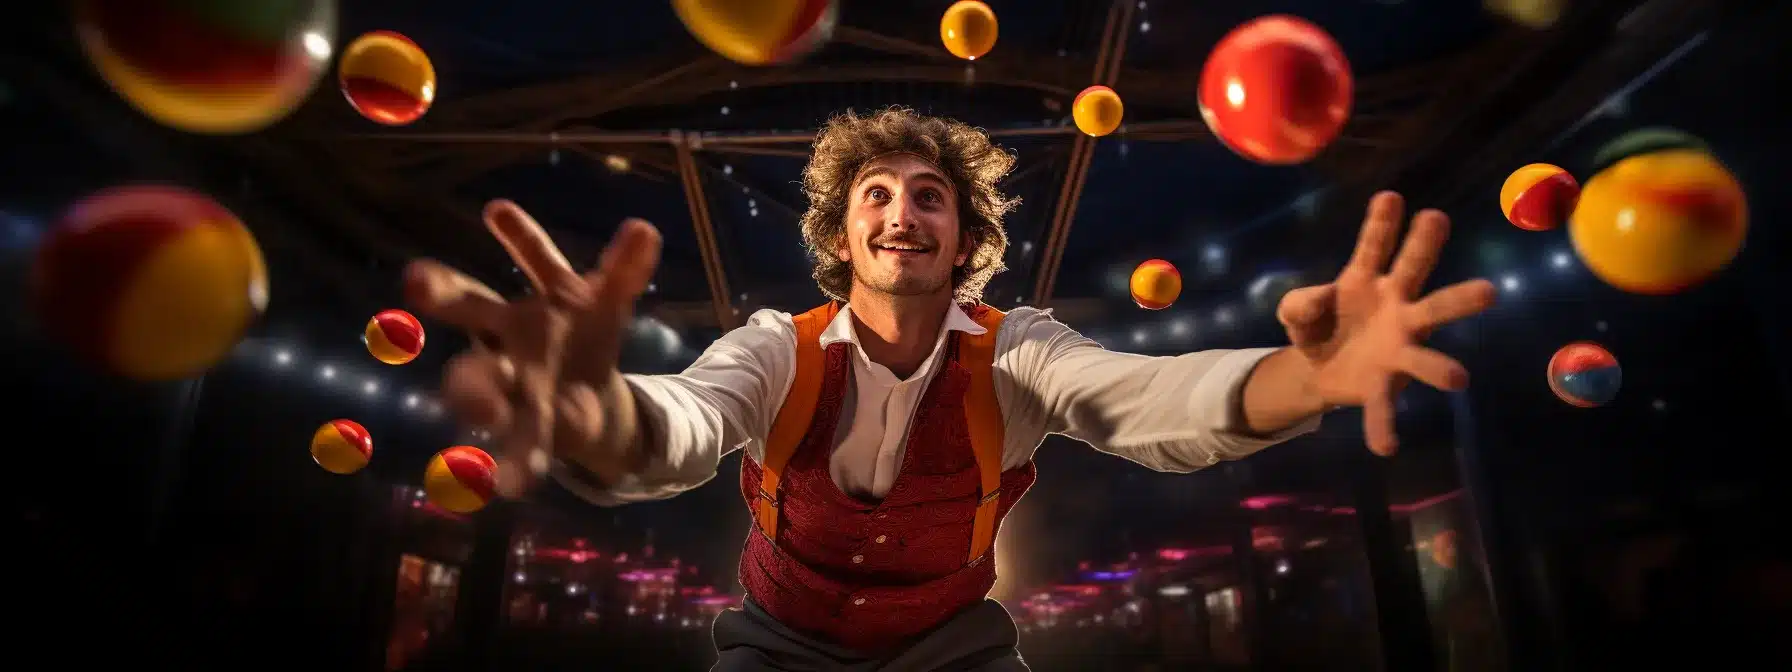 A Skilled Juggler Keeping All The Balls In The Air And Smoothly Rolling Together At A Carnival.